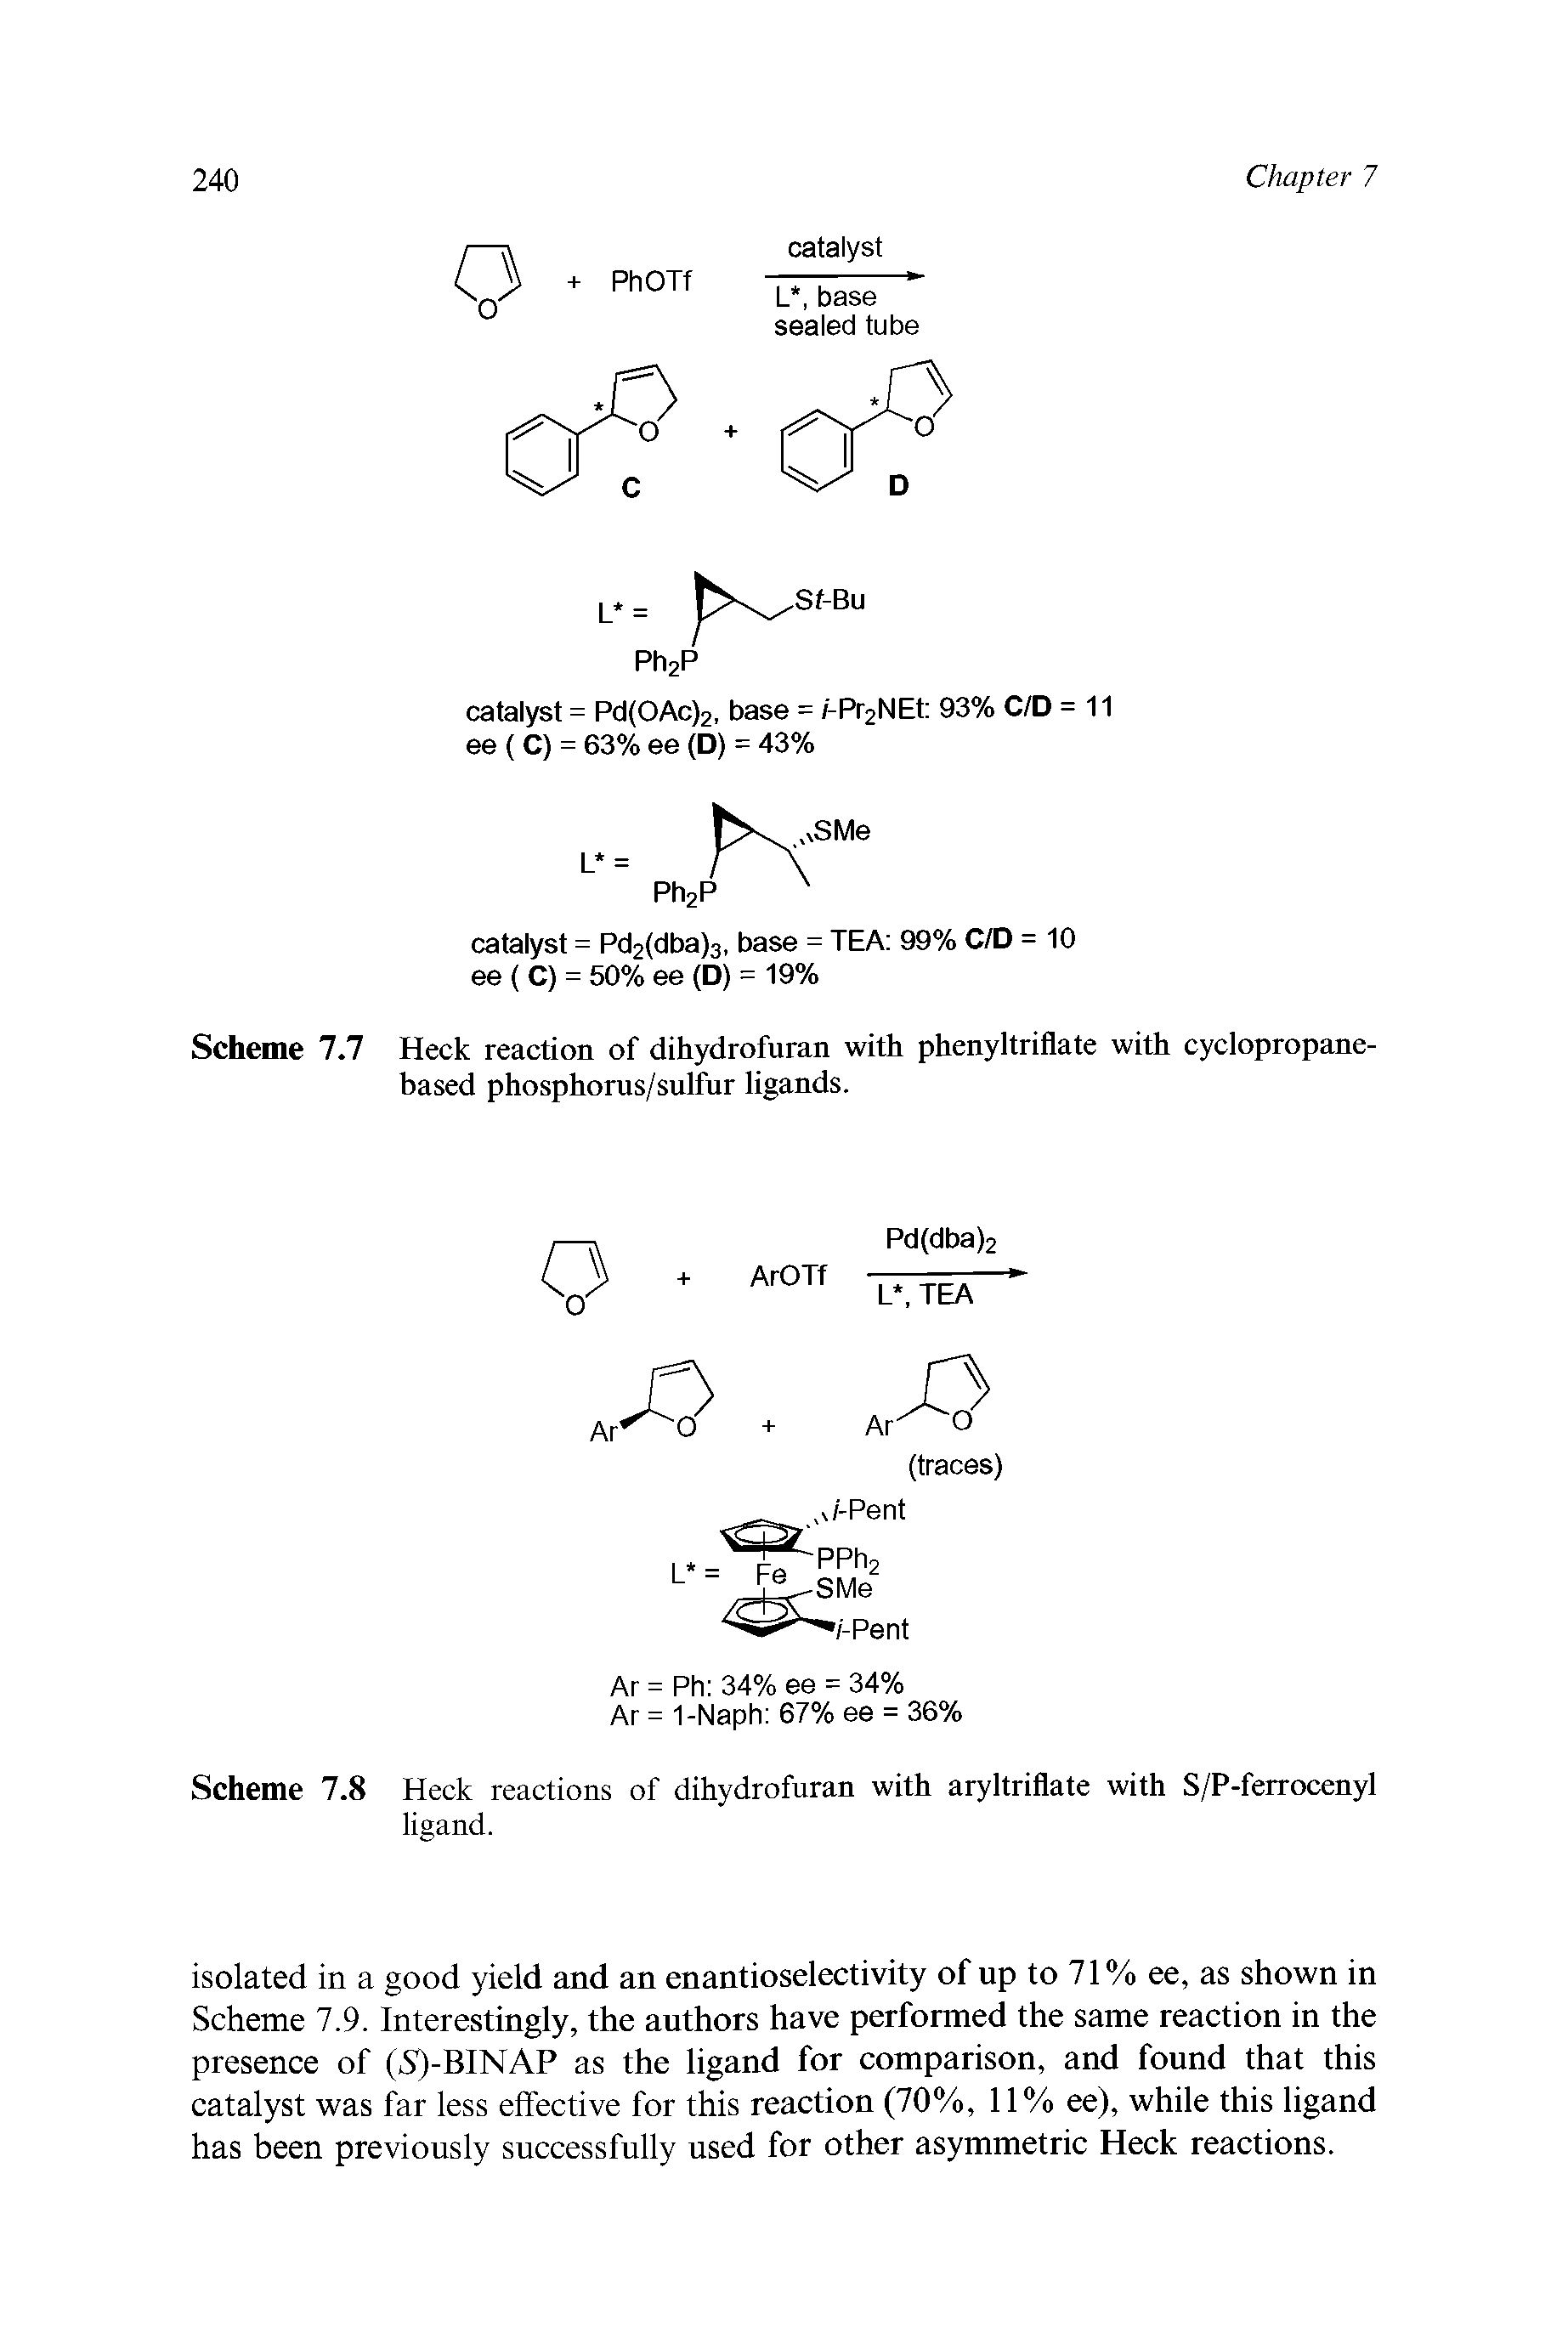 Scheme 7.8 Heck reactions of dihydrofuran with aryltriflate with S/P-ferrocenyl ligand.